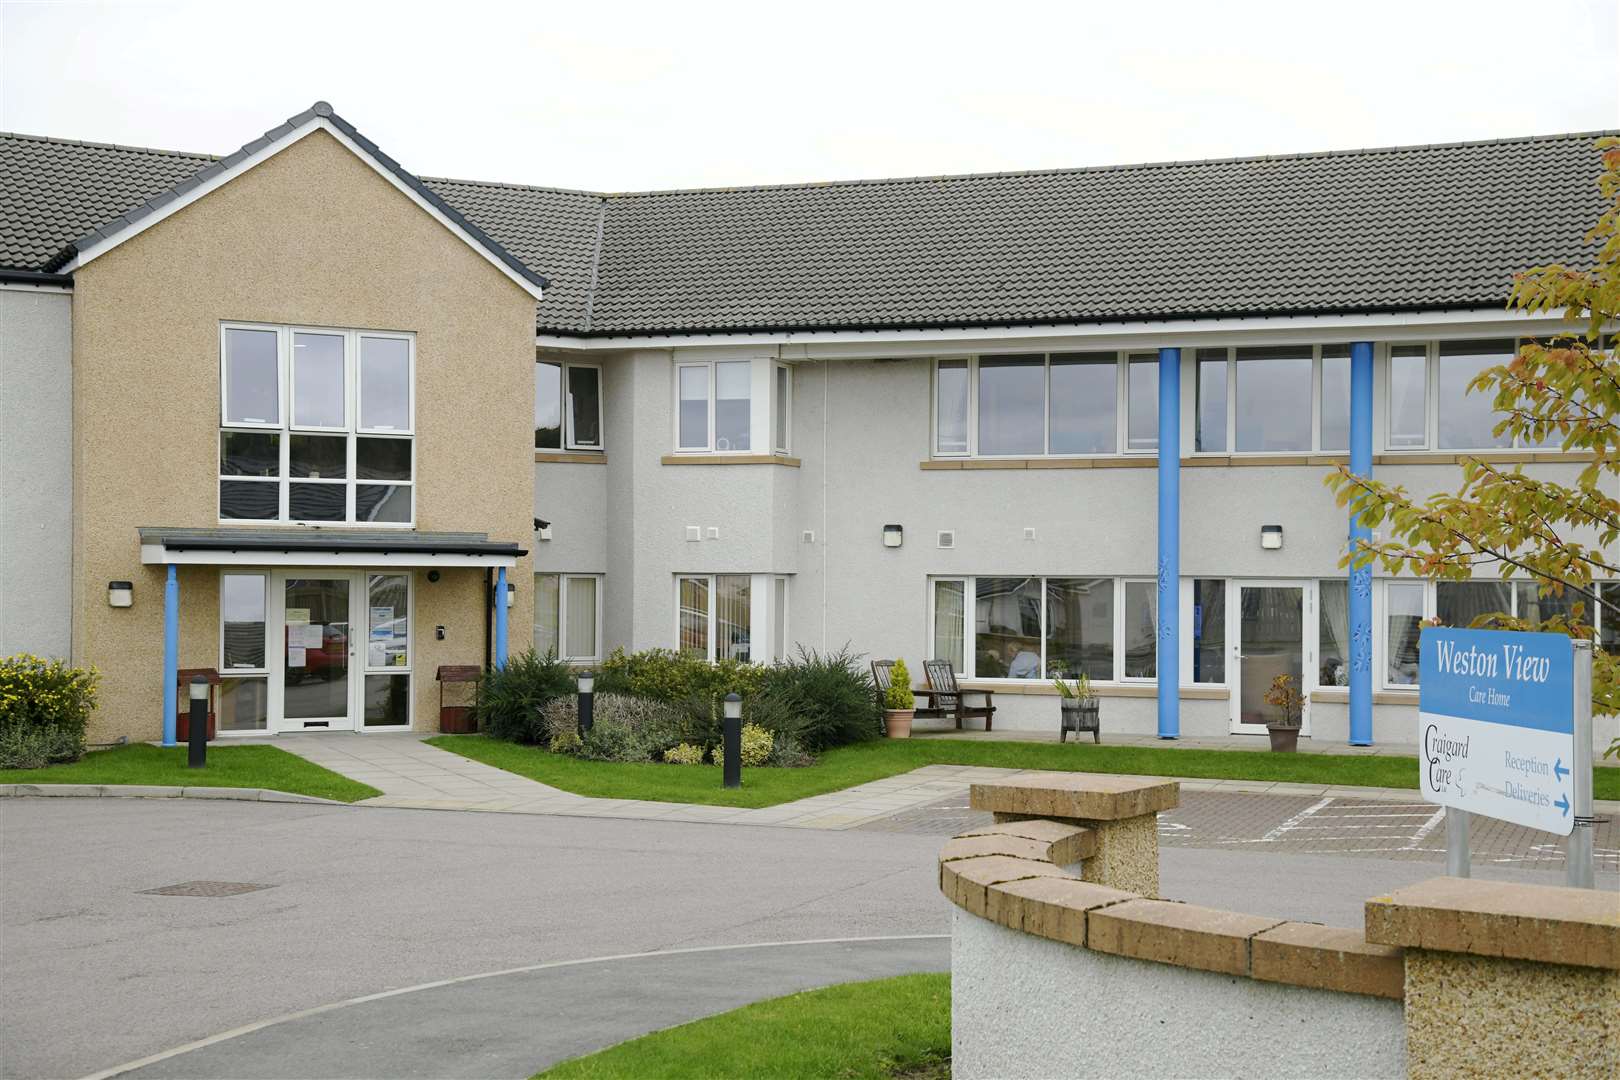 Weston View Care Home, Keith. Picture: Beth Taylor